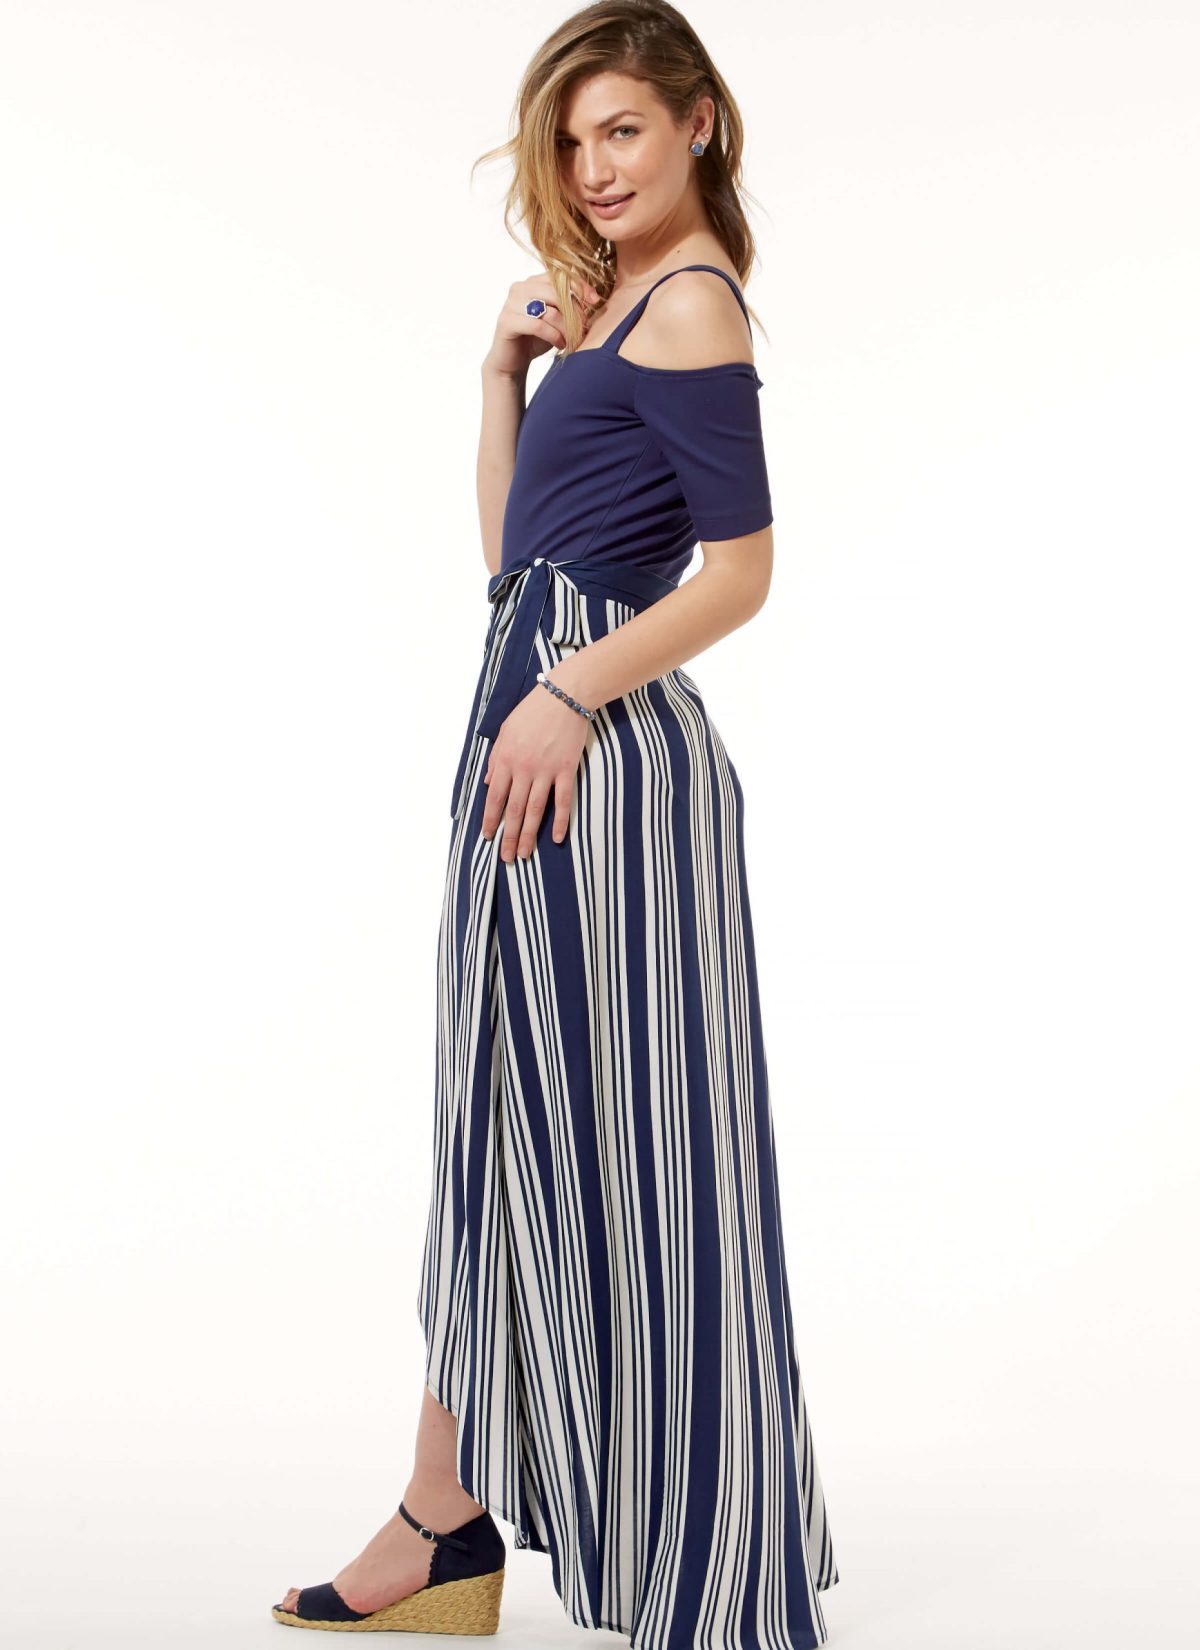 McCall's Sewing Pattern M7606 Misses' Off-the-Shoulder Bodysuits and Wrap Skirts with Side Tie